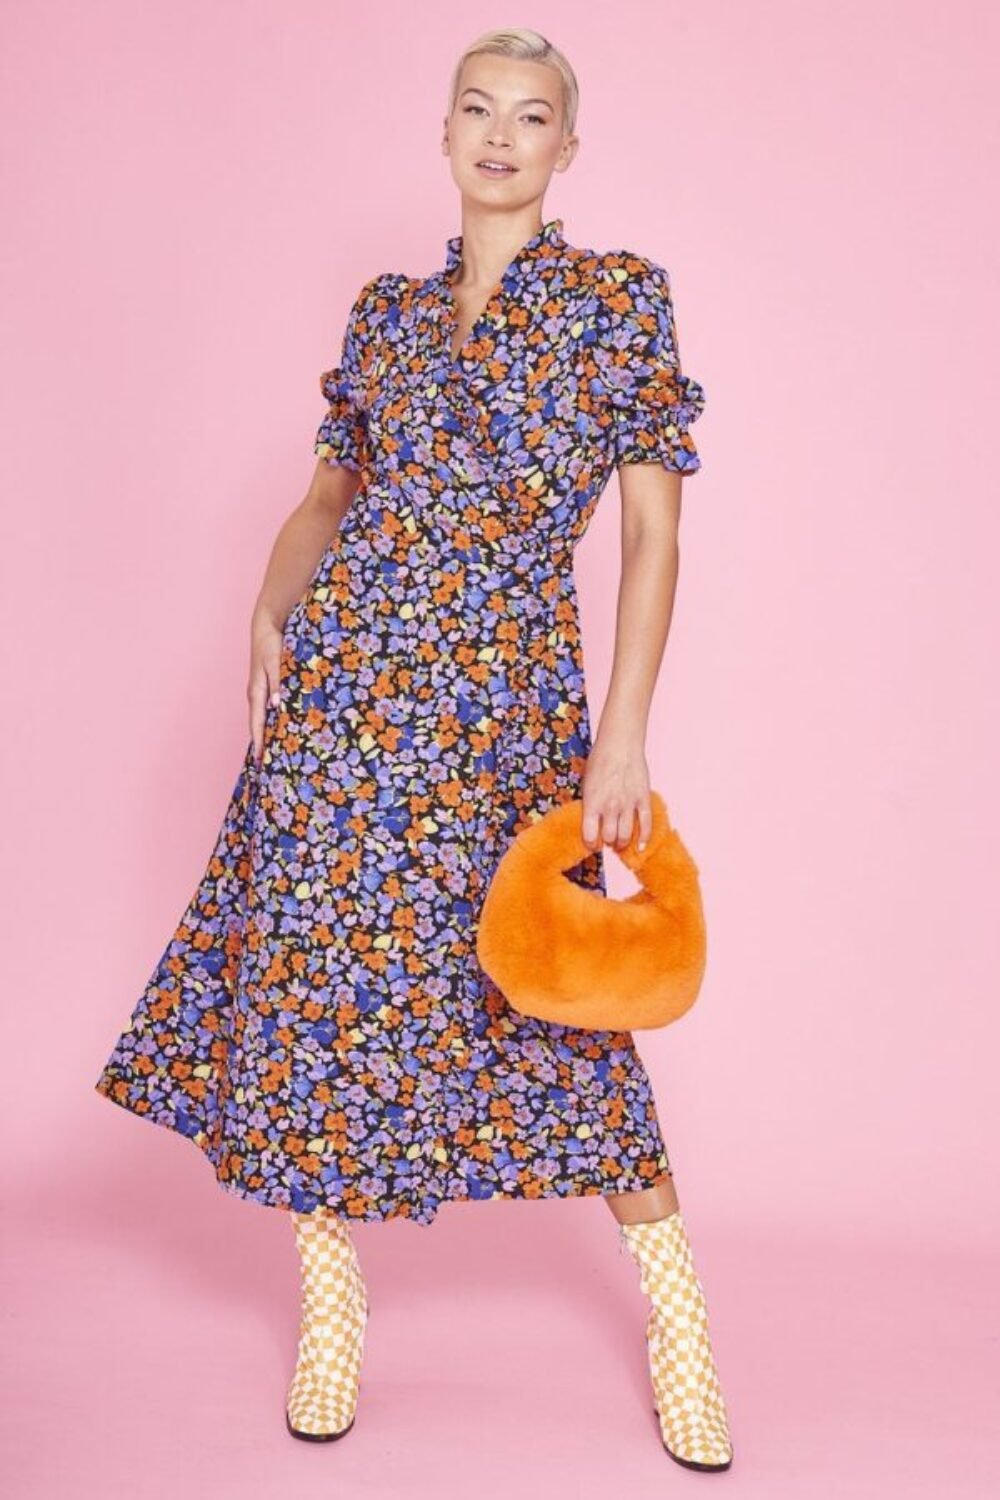 Shop Lux Floral Wrap Dress and women's luxury and designer clothes at www.lux-apparel.co.uk